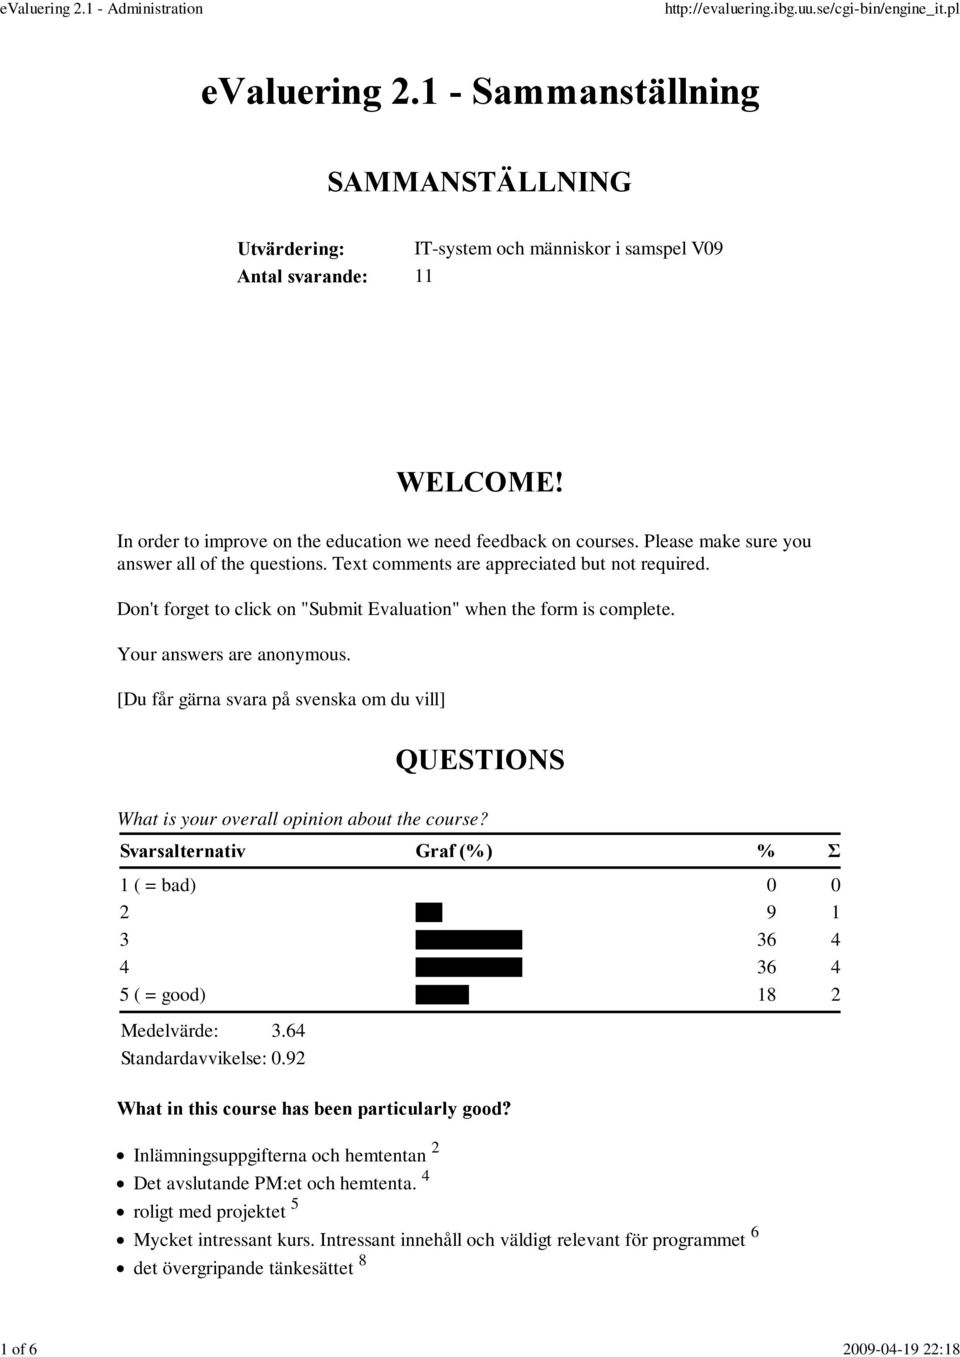 Don't forget to click on "Submit Evaluation" when the form is complete. Your answers are anonymous. [Du får gärna svara på svenska om du vill] QUESTIONS What is your overall opinion about the course?